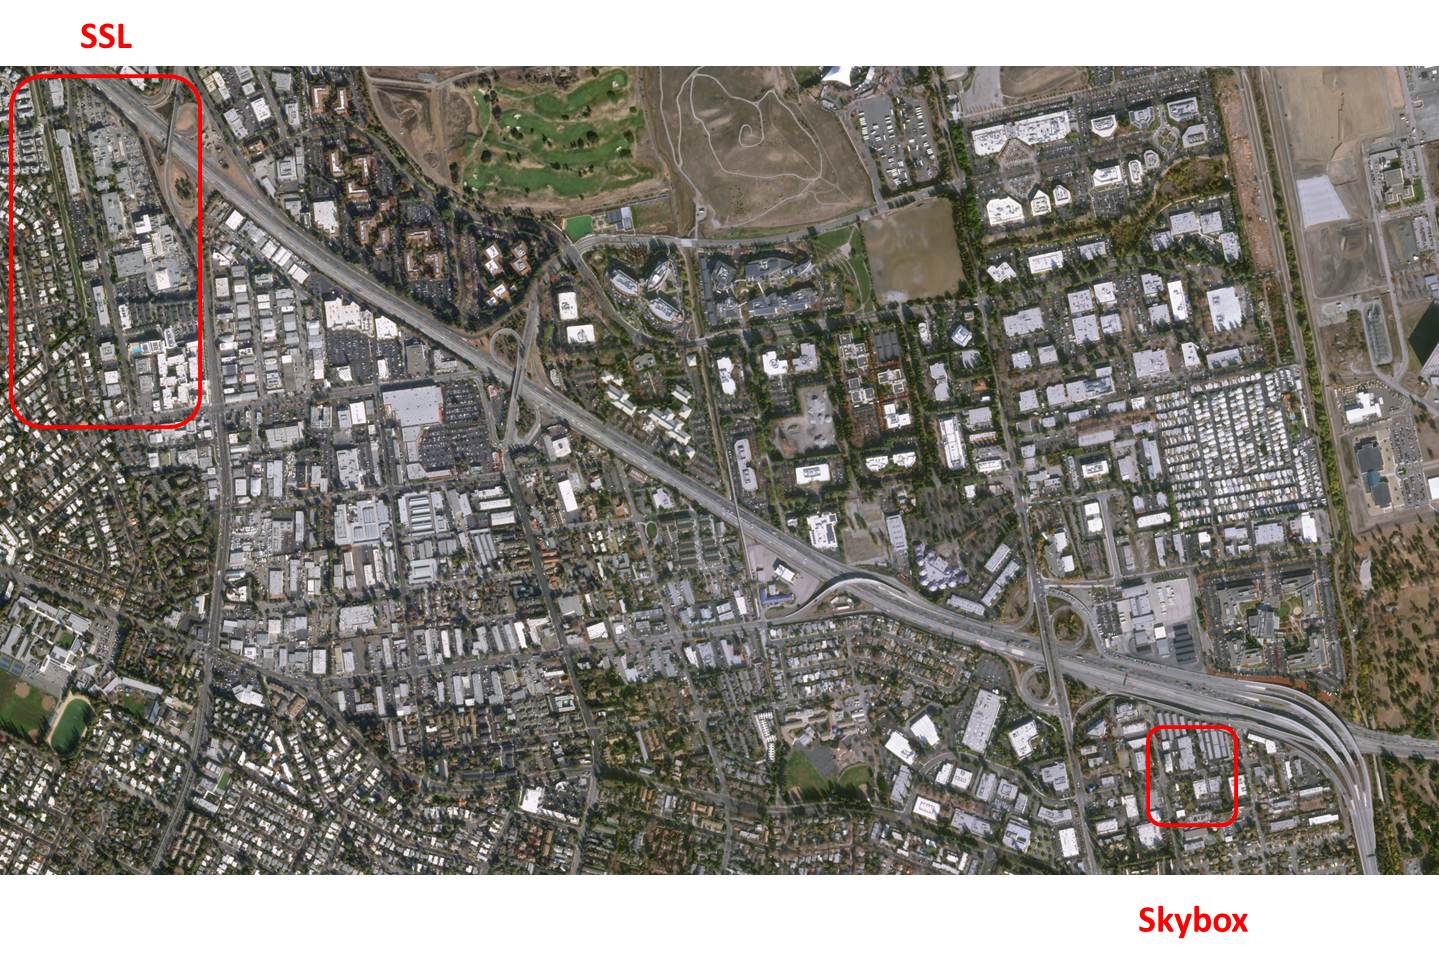 This image was captured by SkySat-1 which shows the SSL and Skybox headquarters. Image courtesy Skybox Imaging.